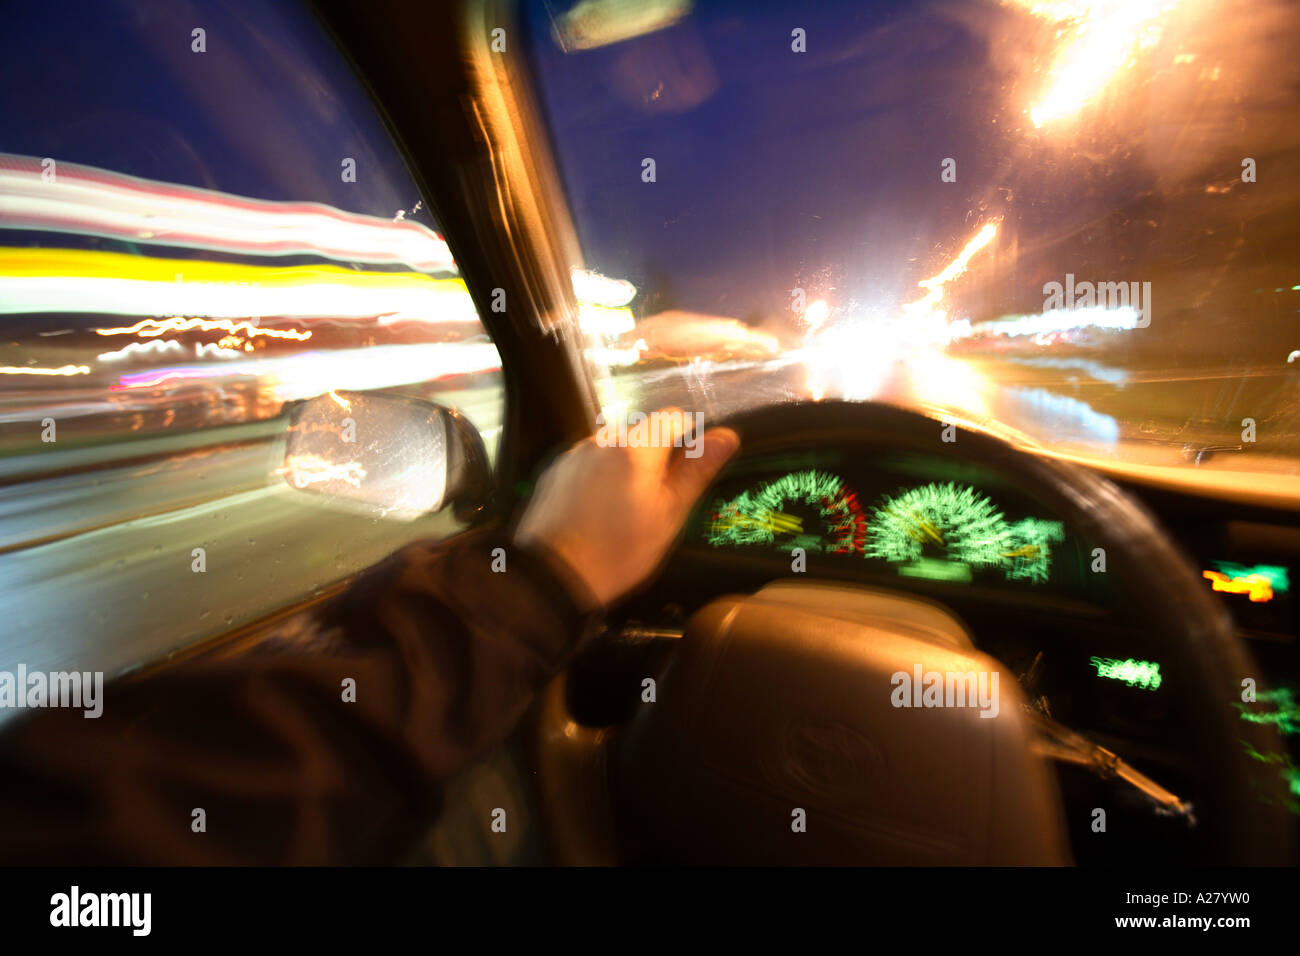 Interior view of person driving at night with lights blurring by.  Shot from drivers perspective. Stock Photo